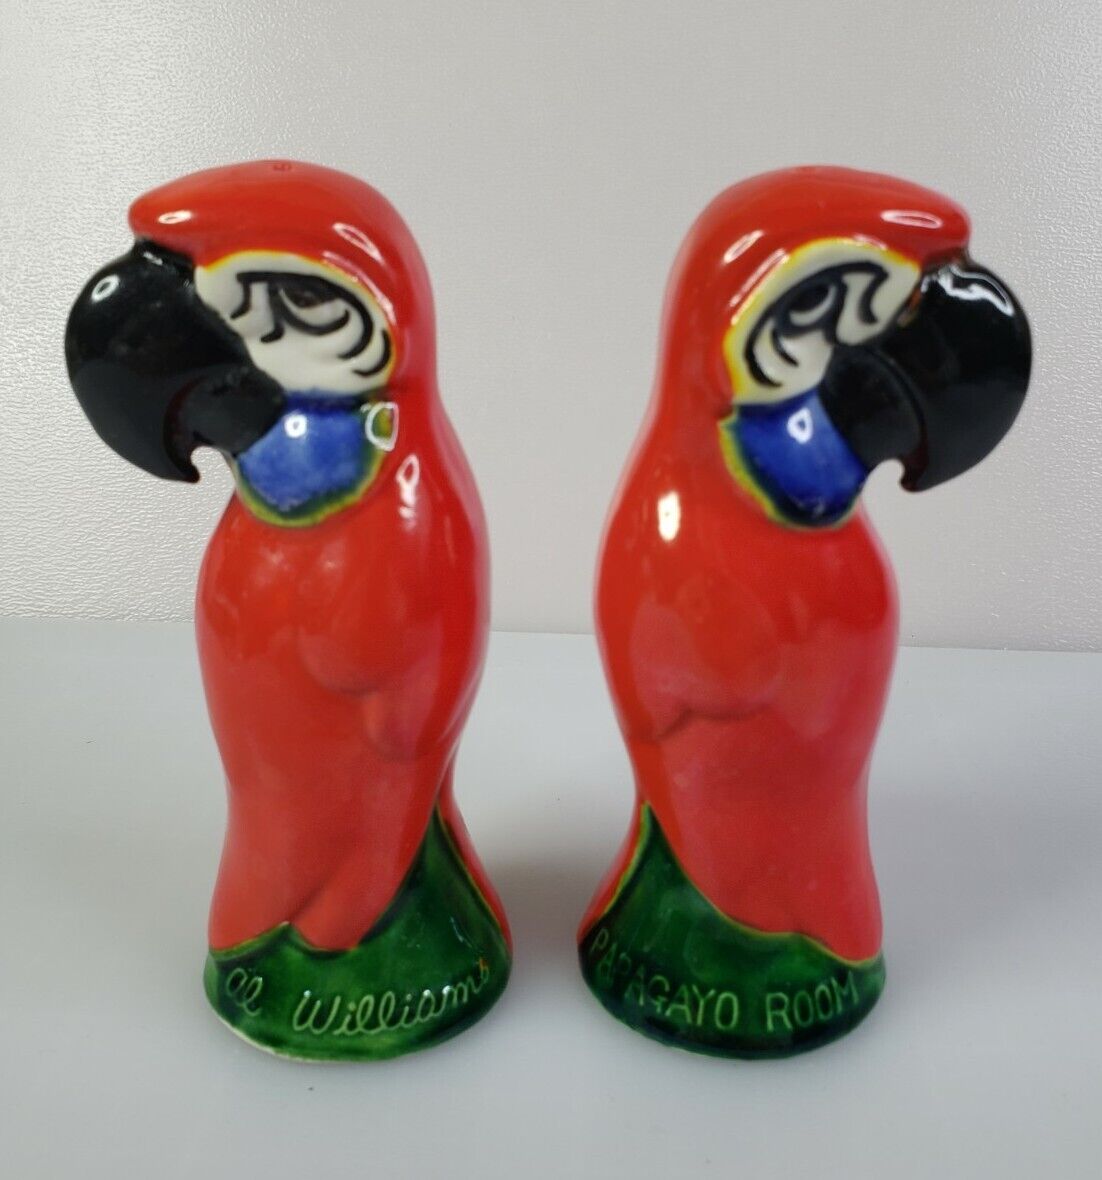 PAPAGAYO Room FAIRMONT Hotel SF CA Parrot SALT & PEPPER Shakers by AL WILLIAMS 